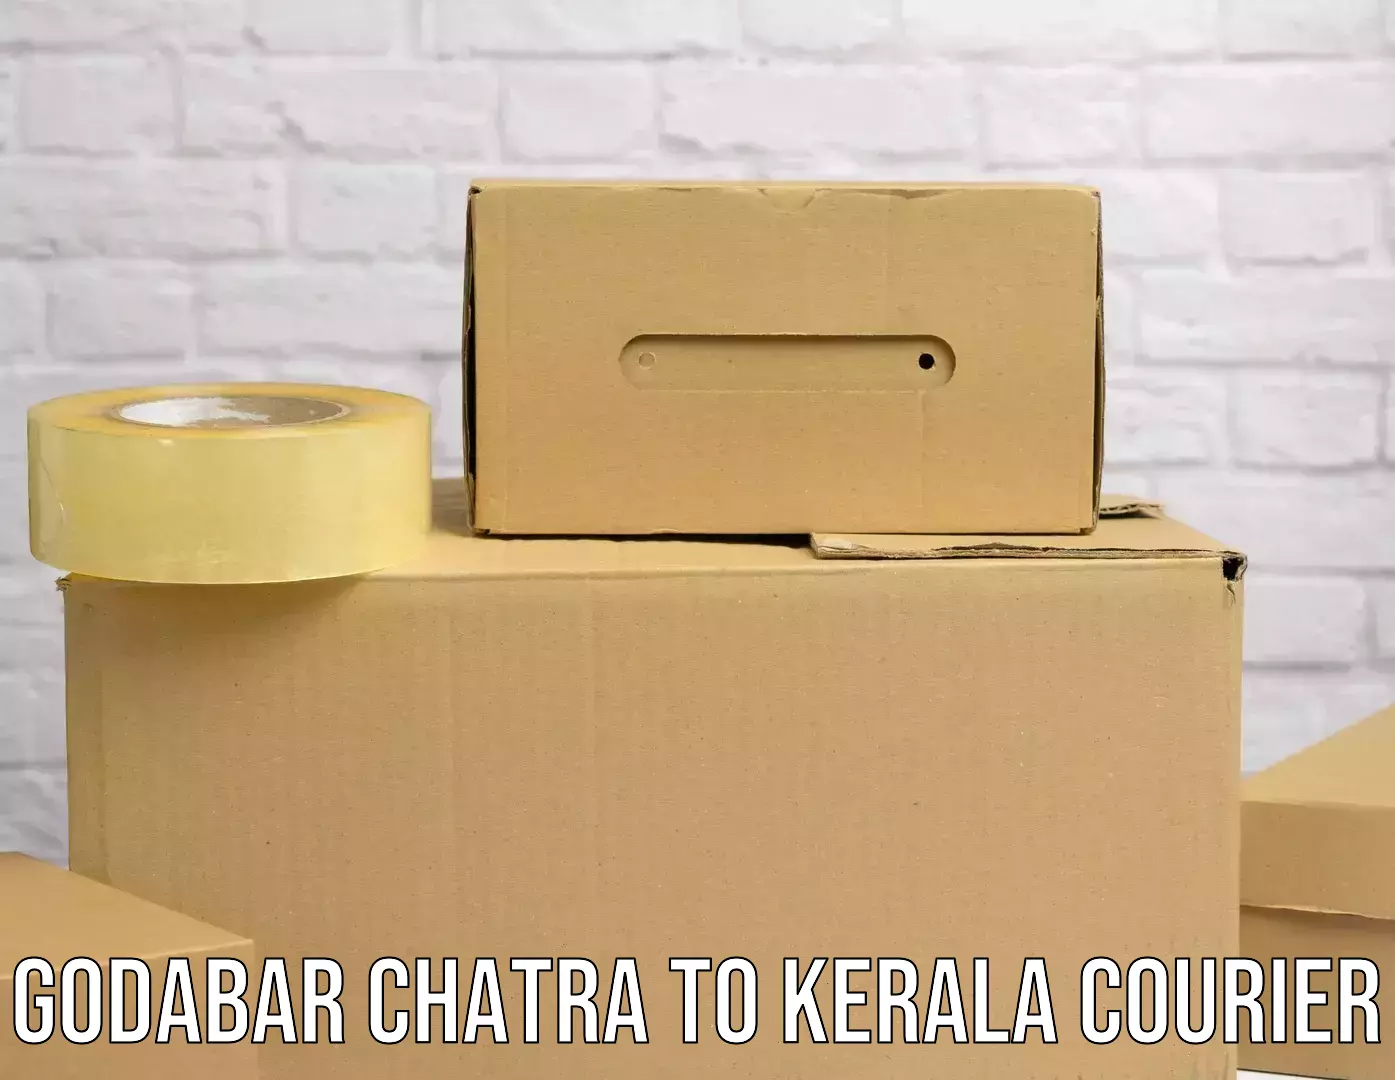 Express package services Godabar Chatra to Kanhangad